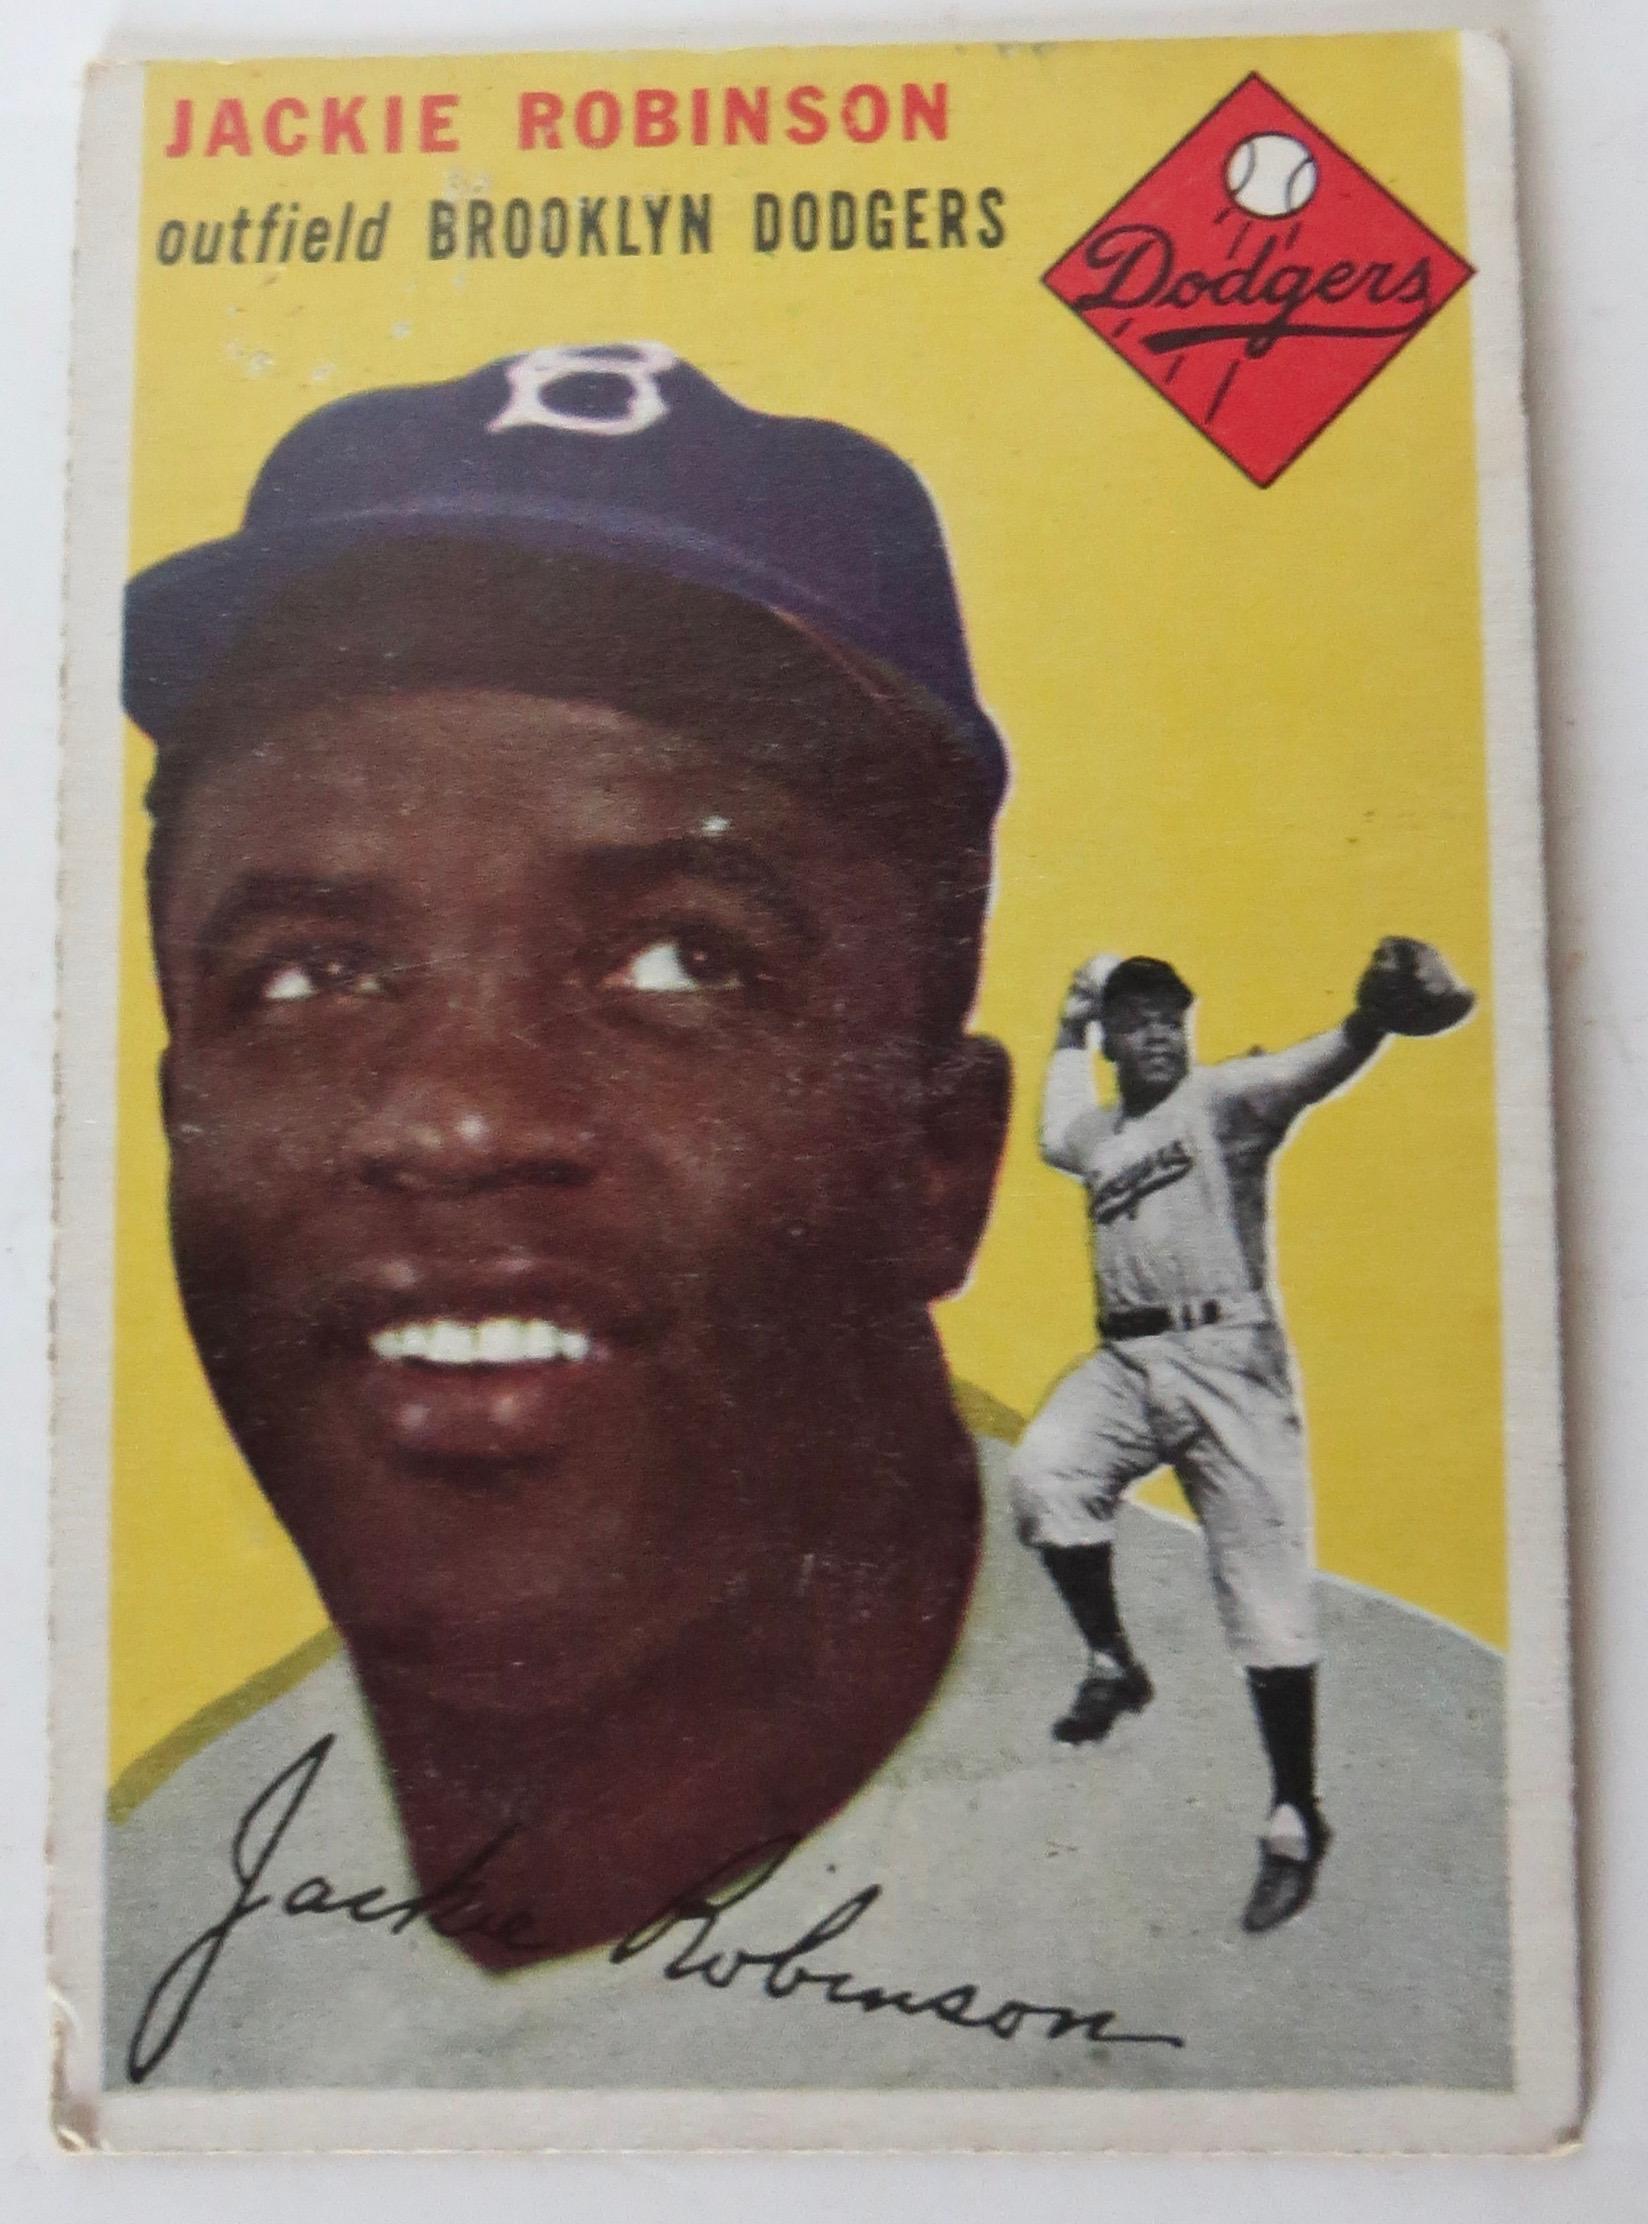 This ensemble of two Jackie Robinson vintage collectibles. Both from 1954 consists of the following:

1) Baseball Card by The Topps Baseball Card Company #10 1954. 
The card is in very good condition with no creases or bend---very sound. The